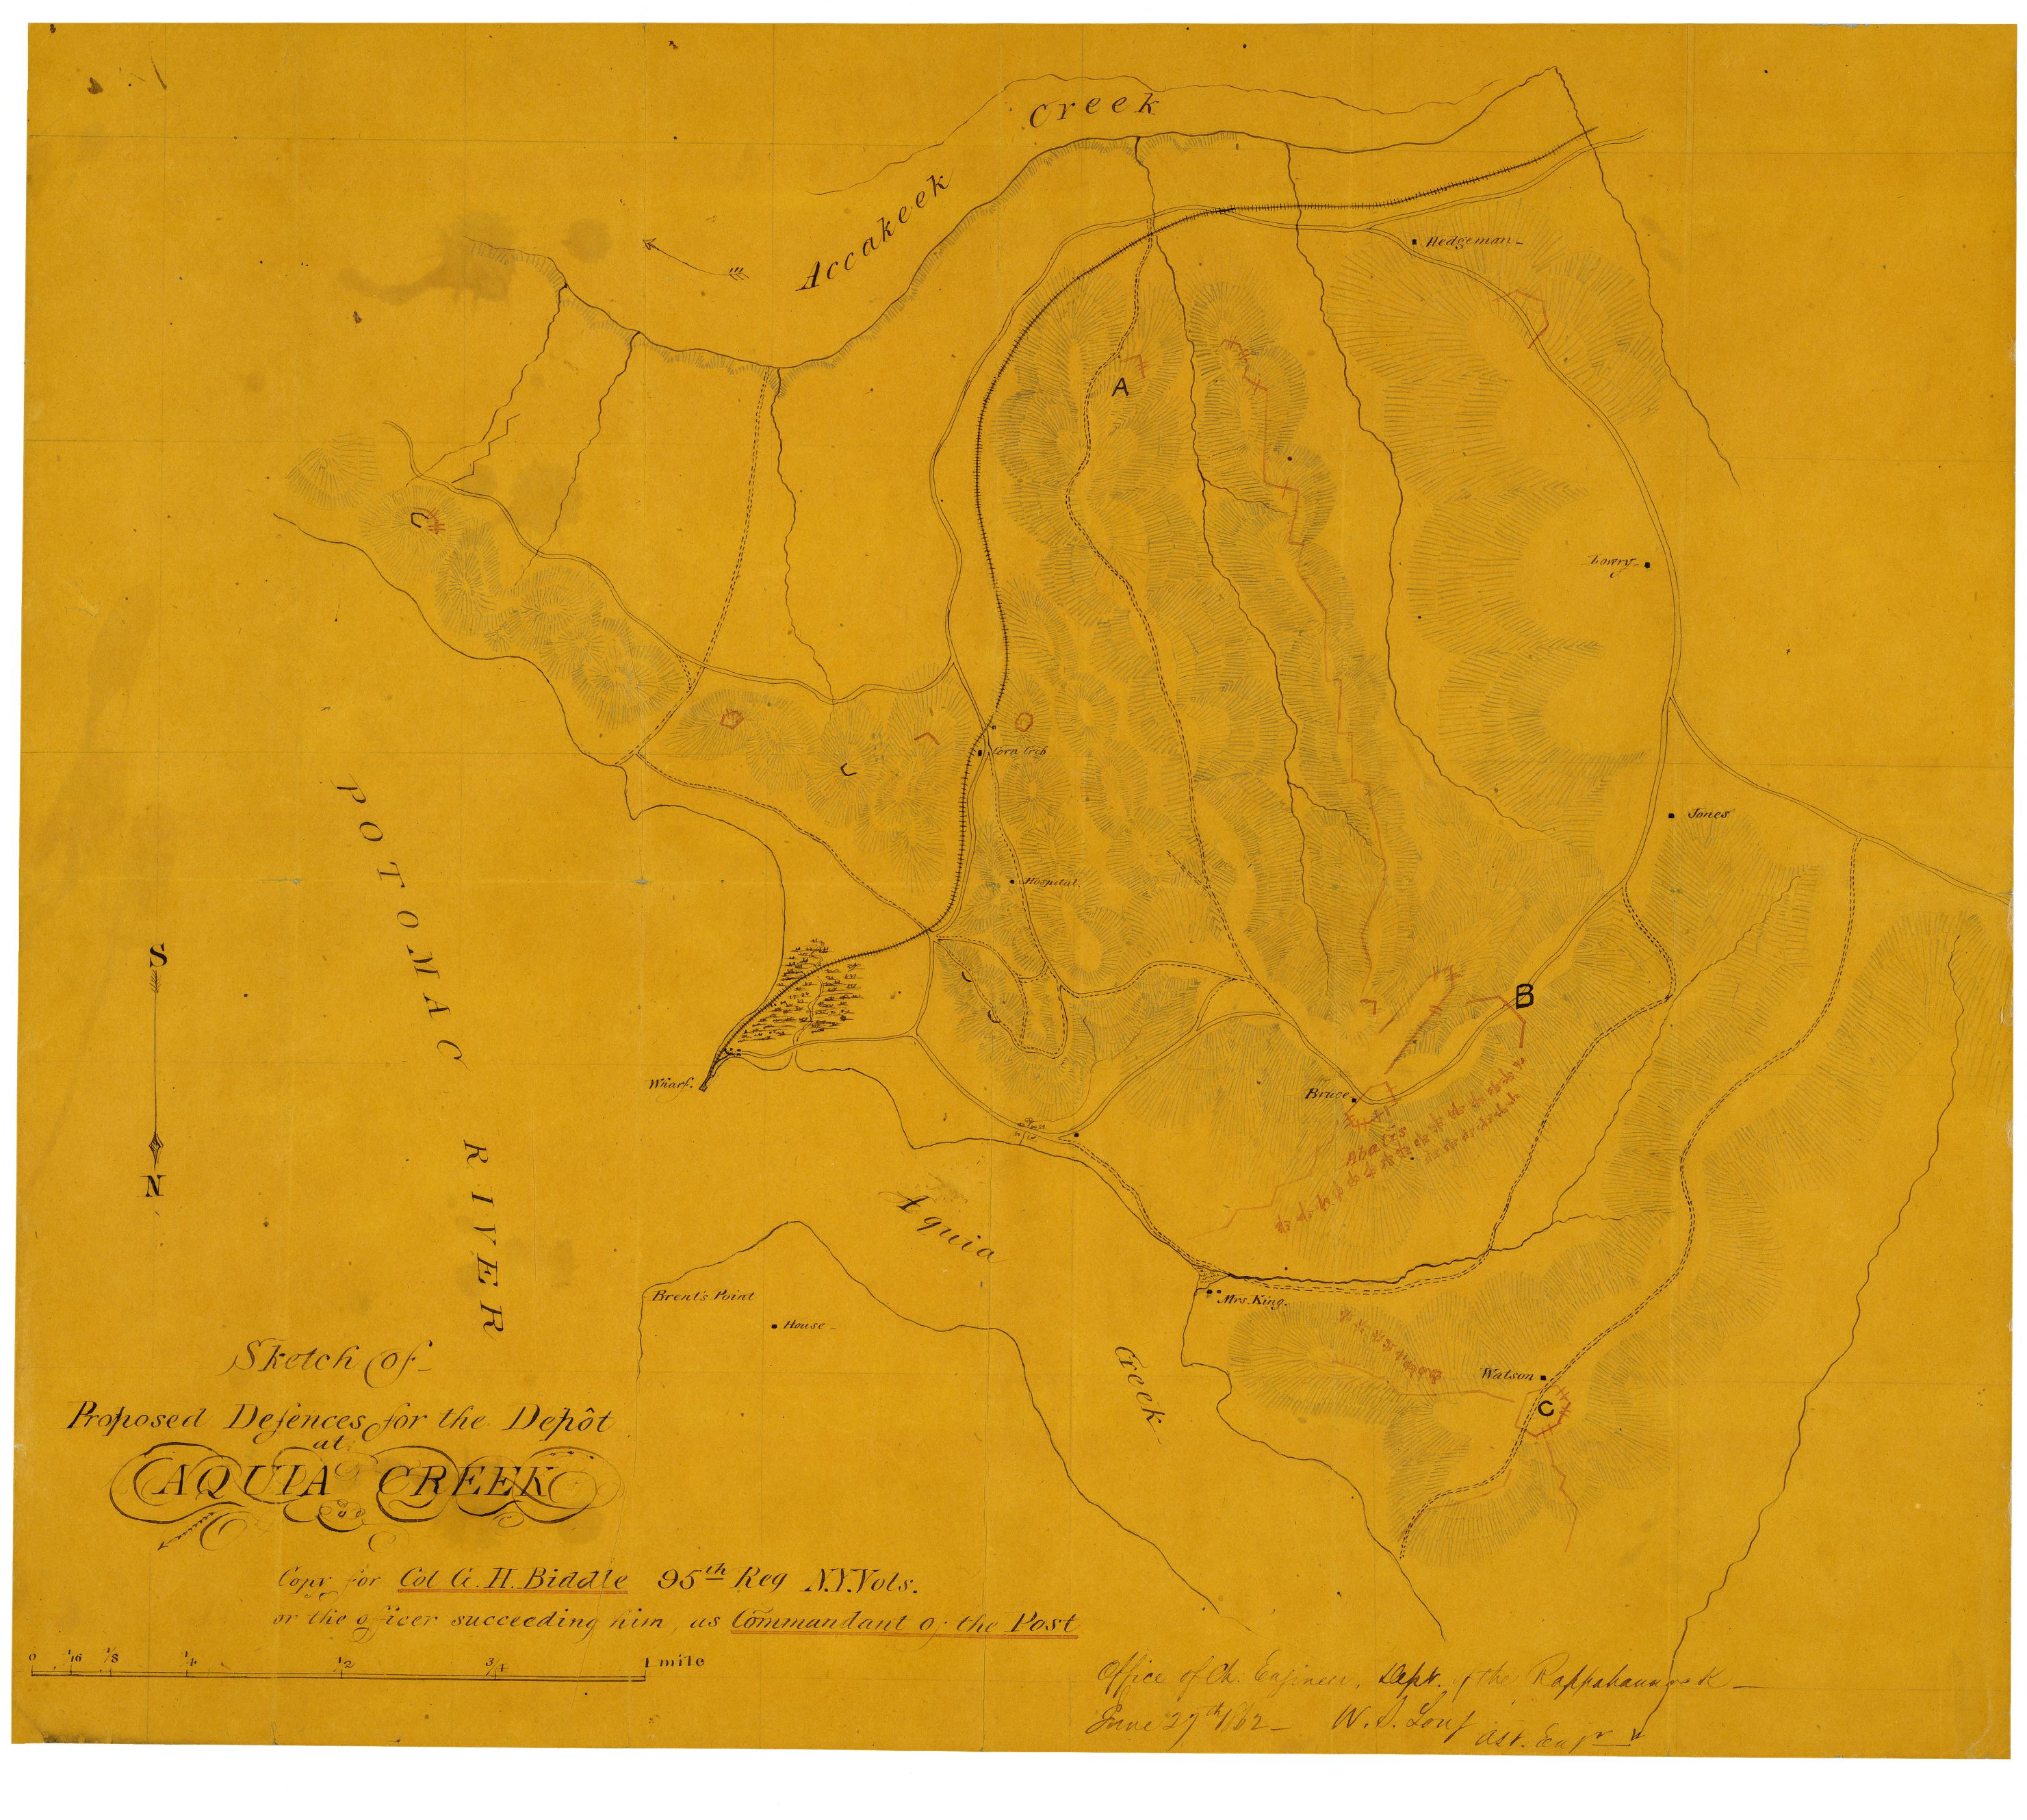 acquia creek landing and canterbury proposed union defenses and rebel artillery emplacements June 1862